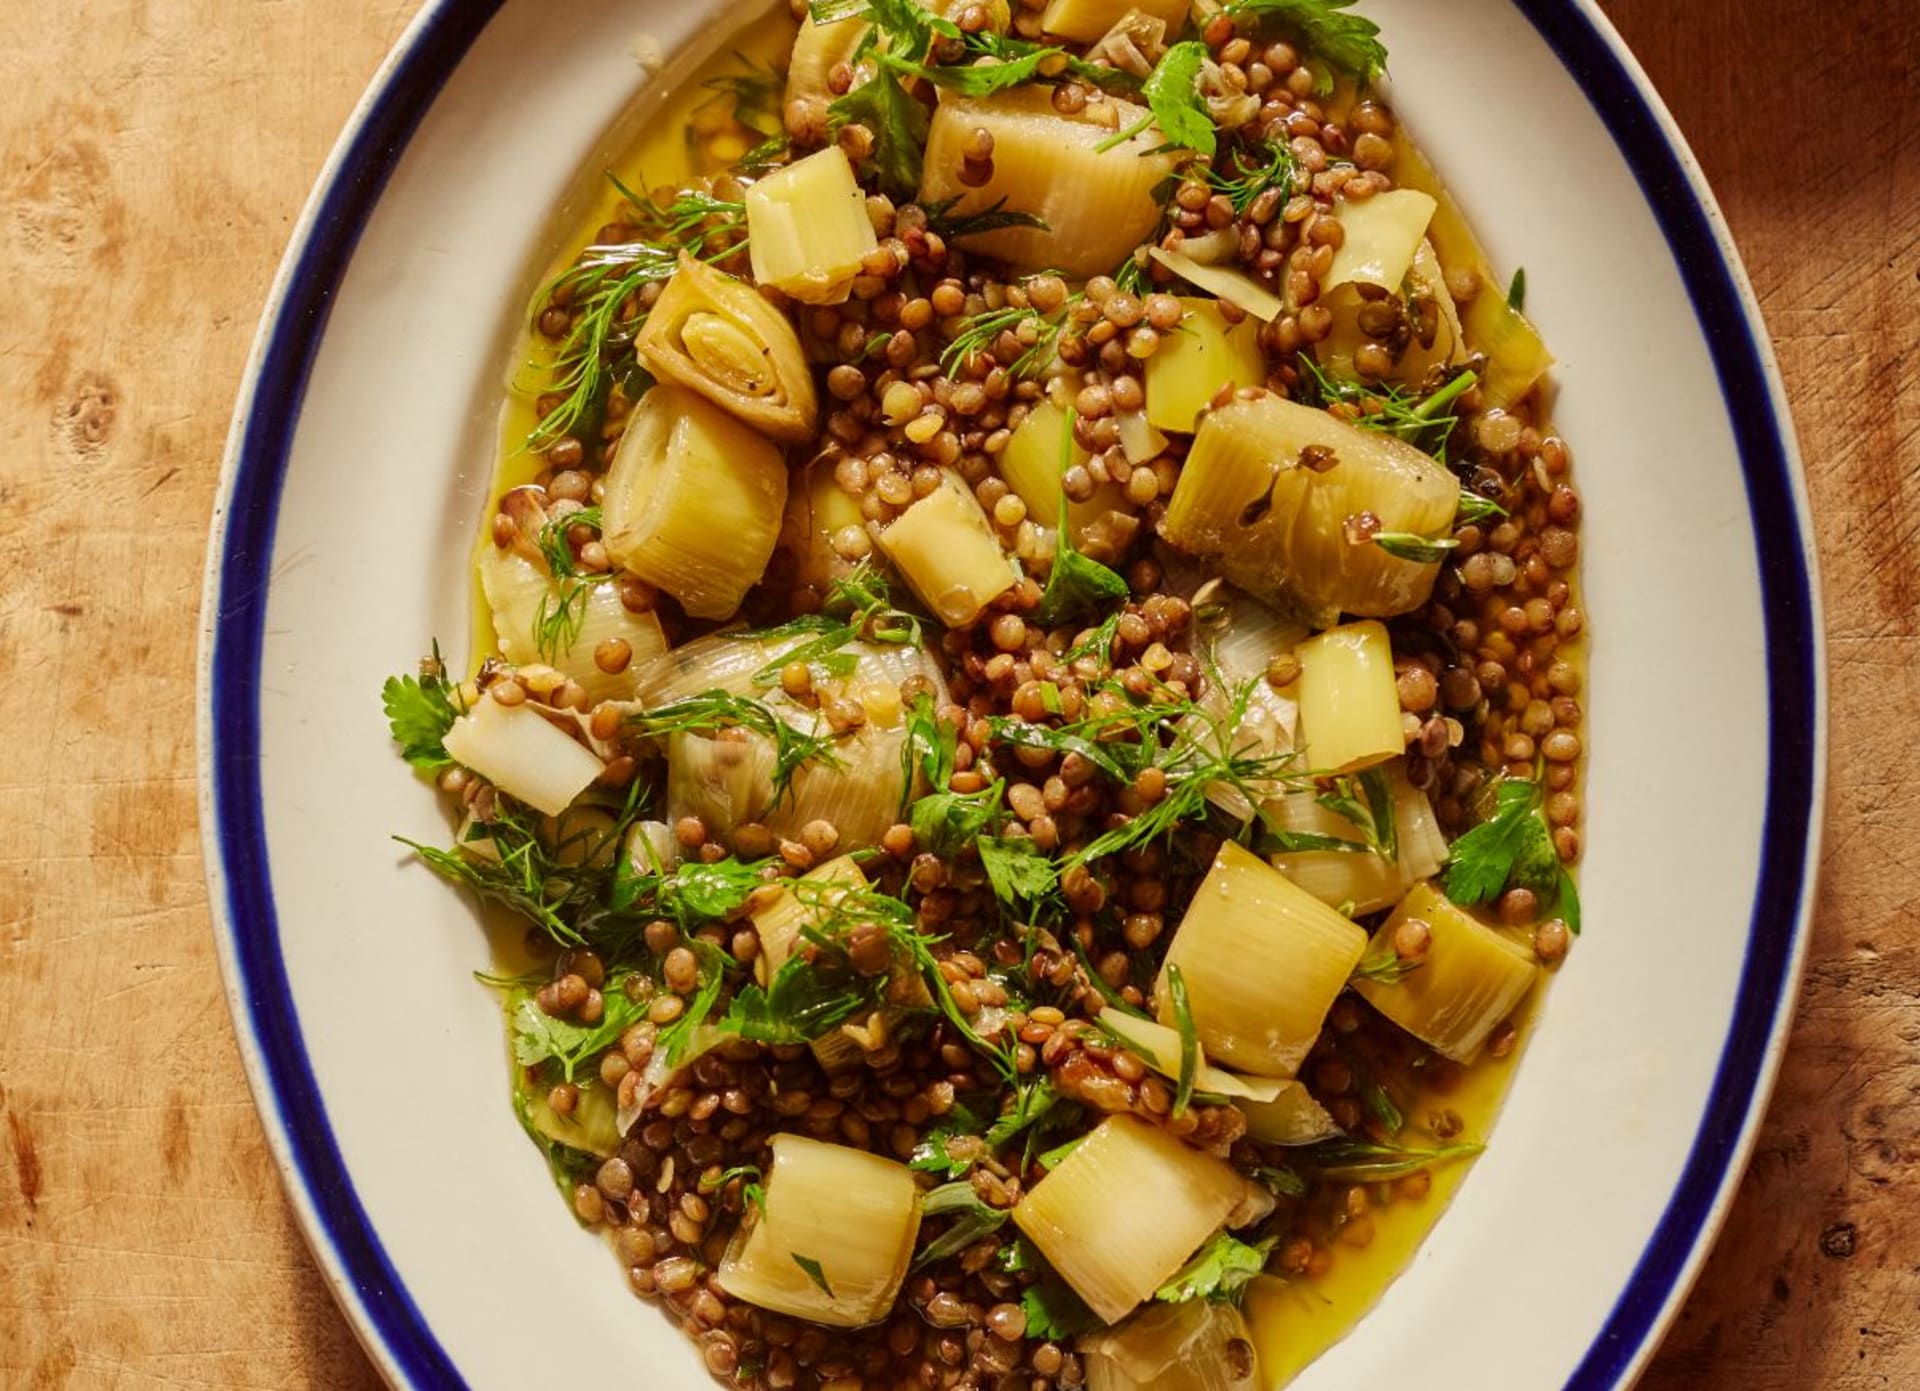 Leek Confit with Puy Lentils and Cream of Shallots, according to Ottolenghi